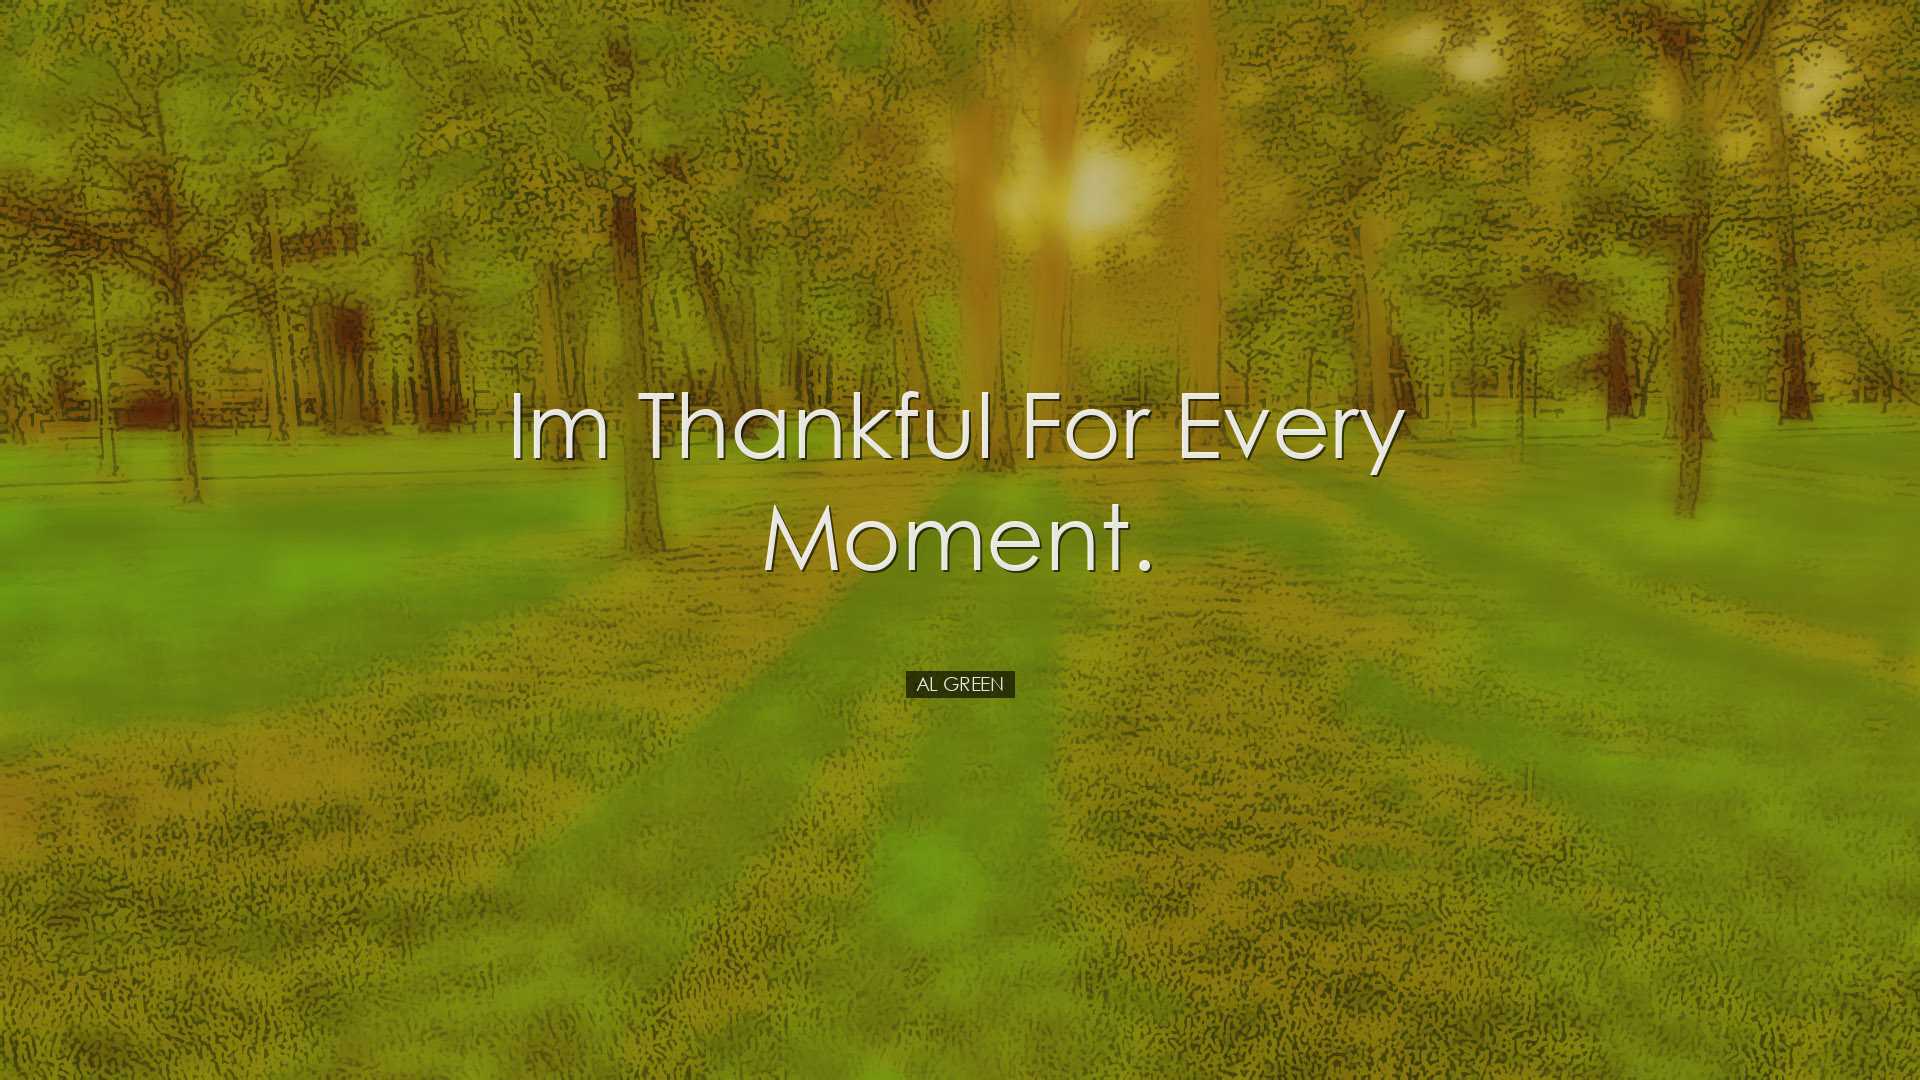 Im thankful for every moment. - Al Green